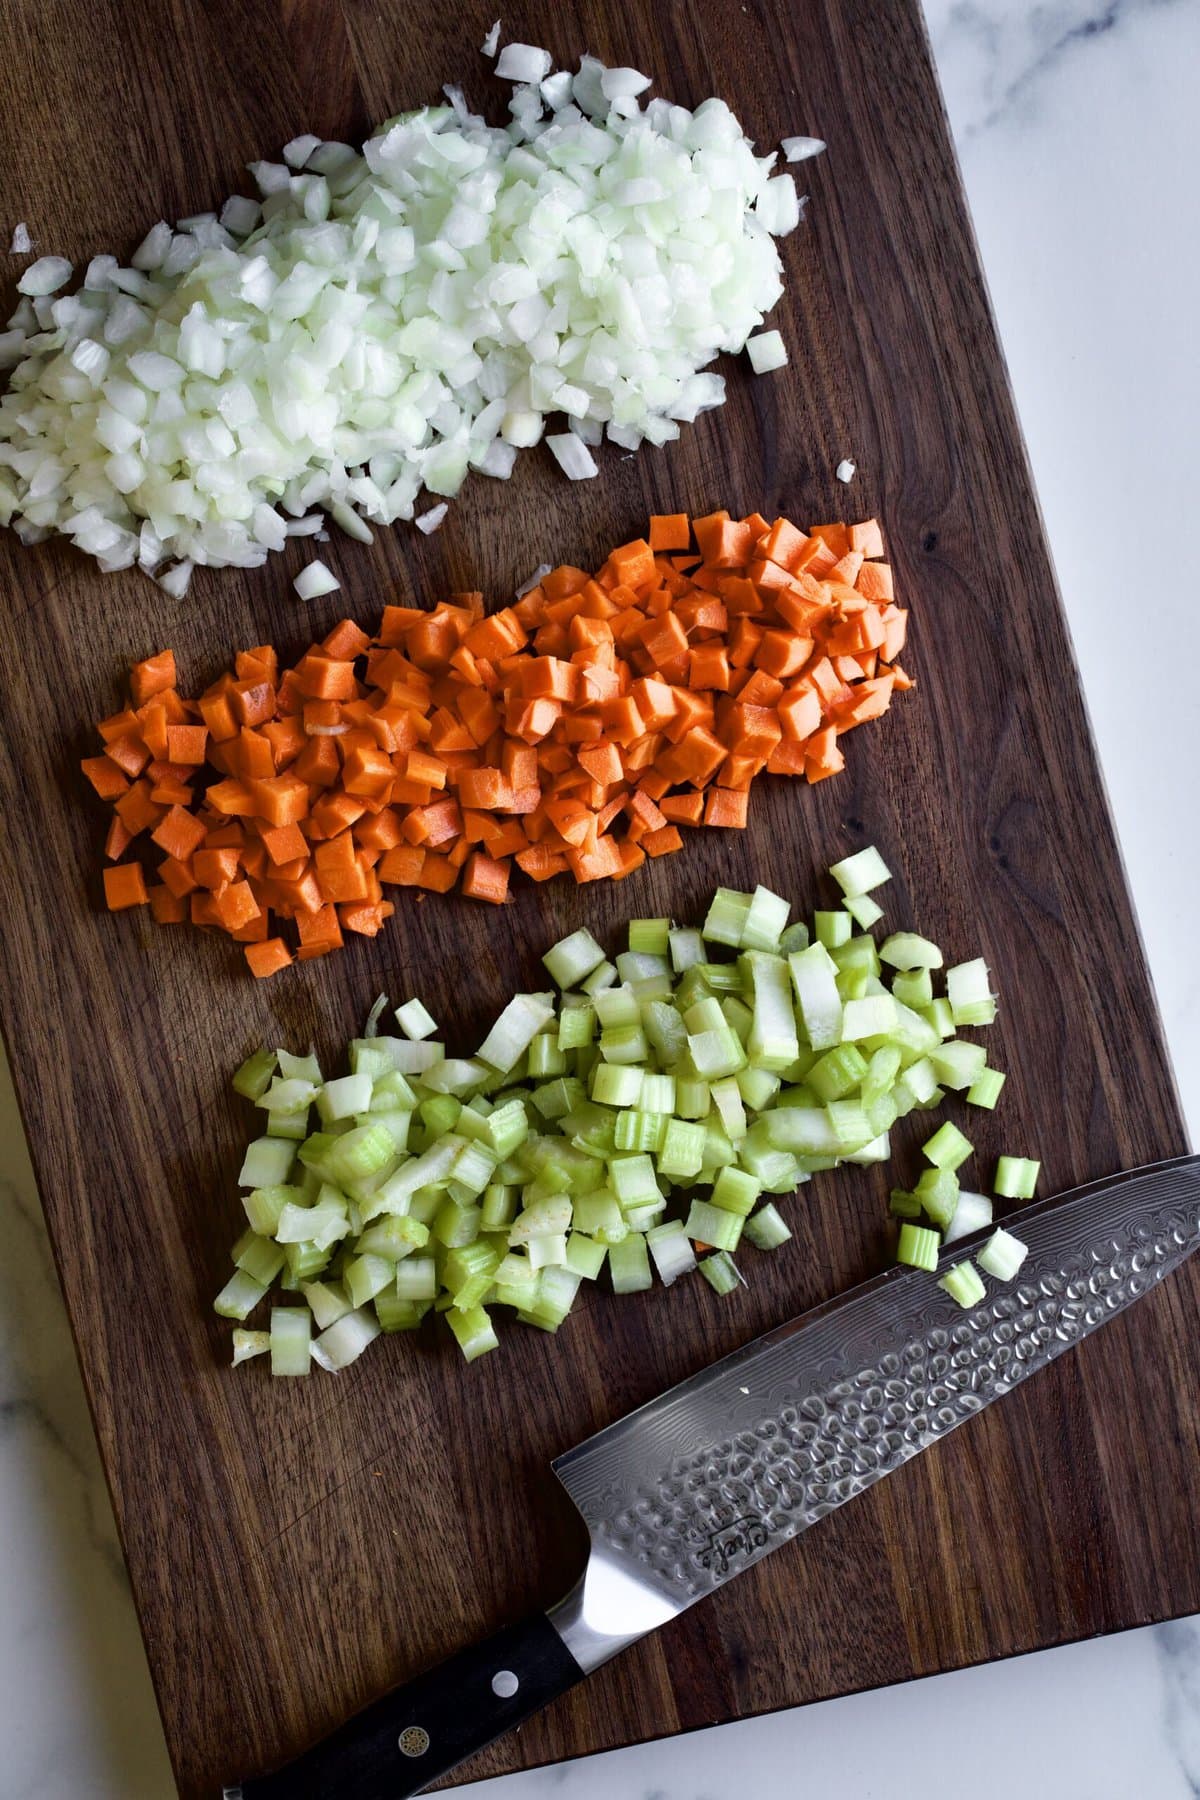 diced ingredients for soffritto on wooden cutting board.